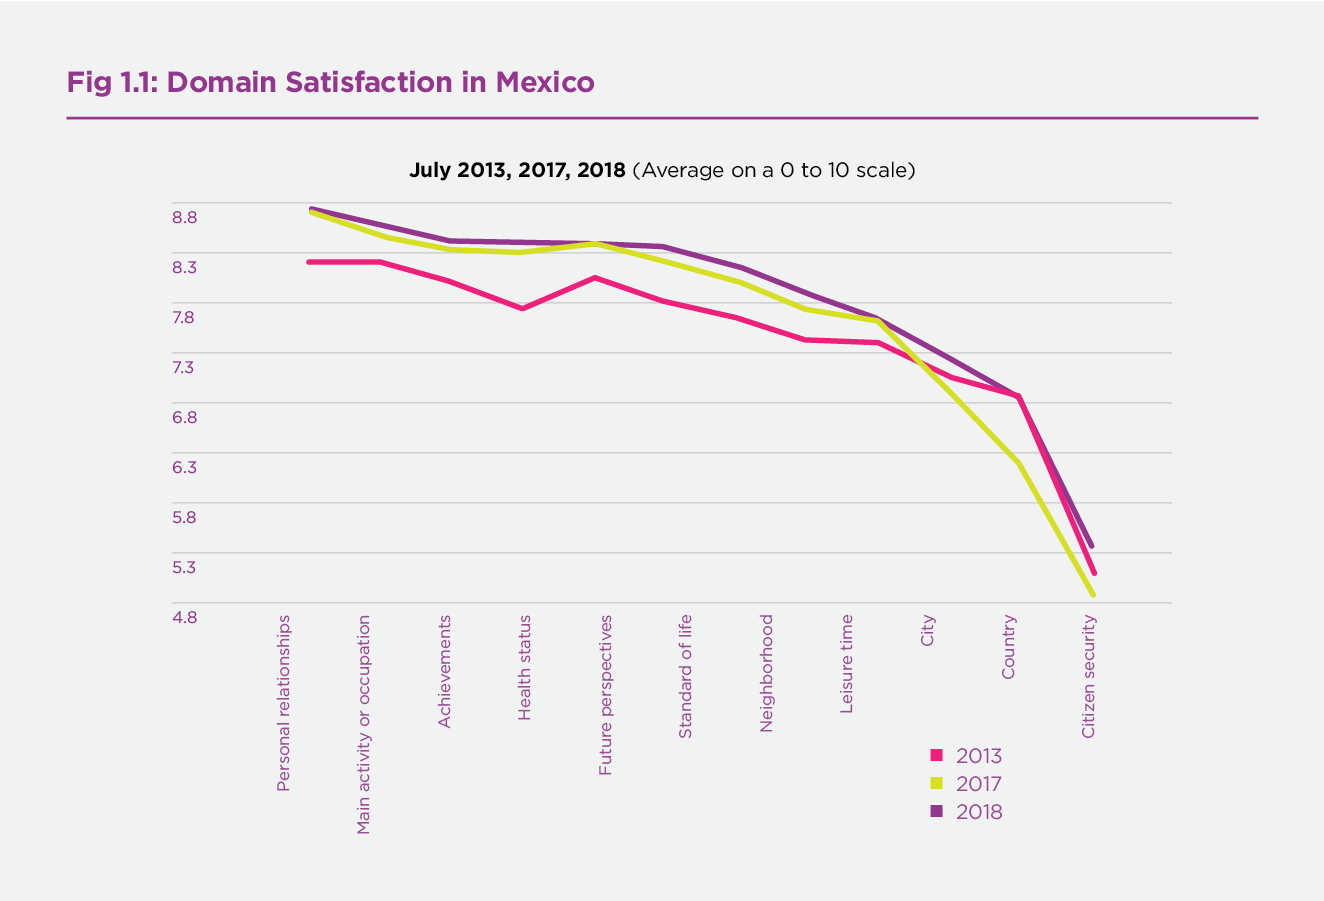 Figure 1.1 Domain Satisfaction in Mexico